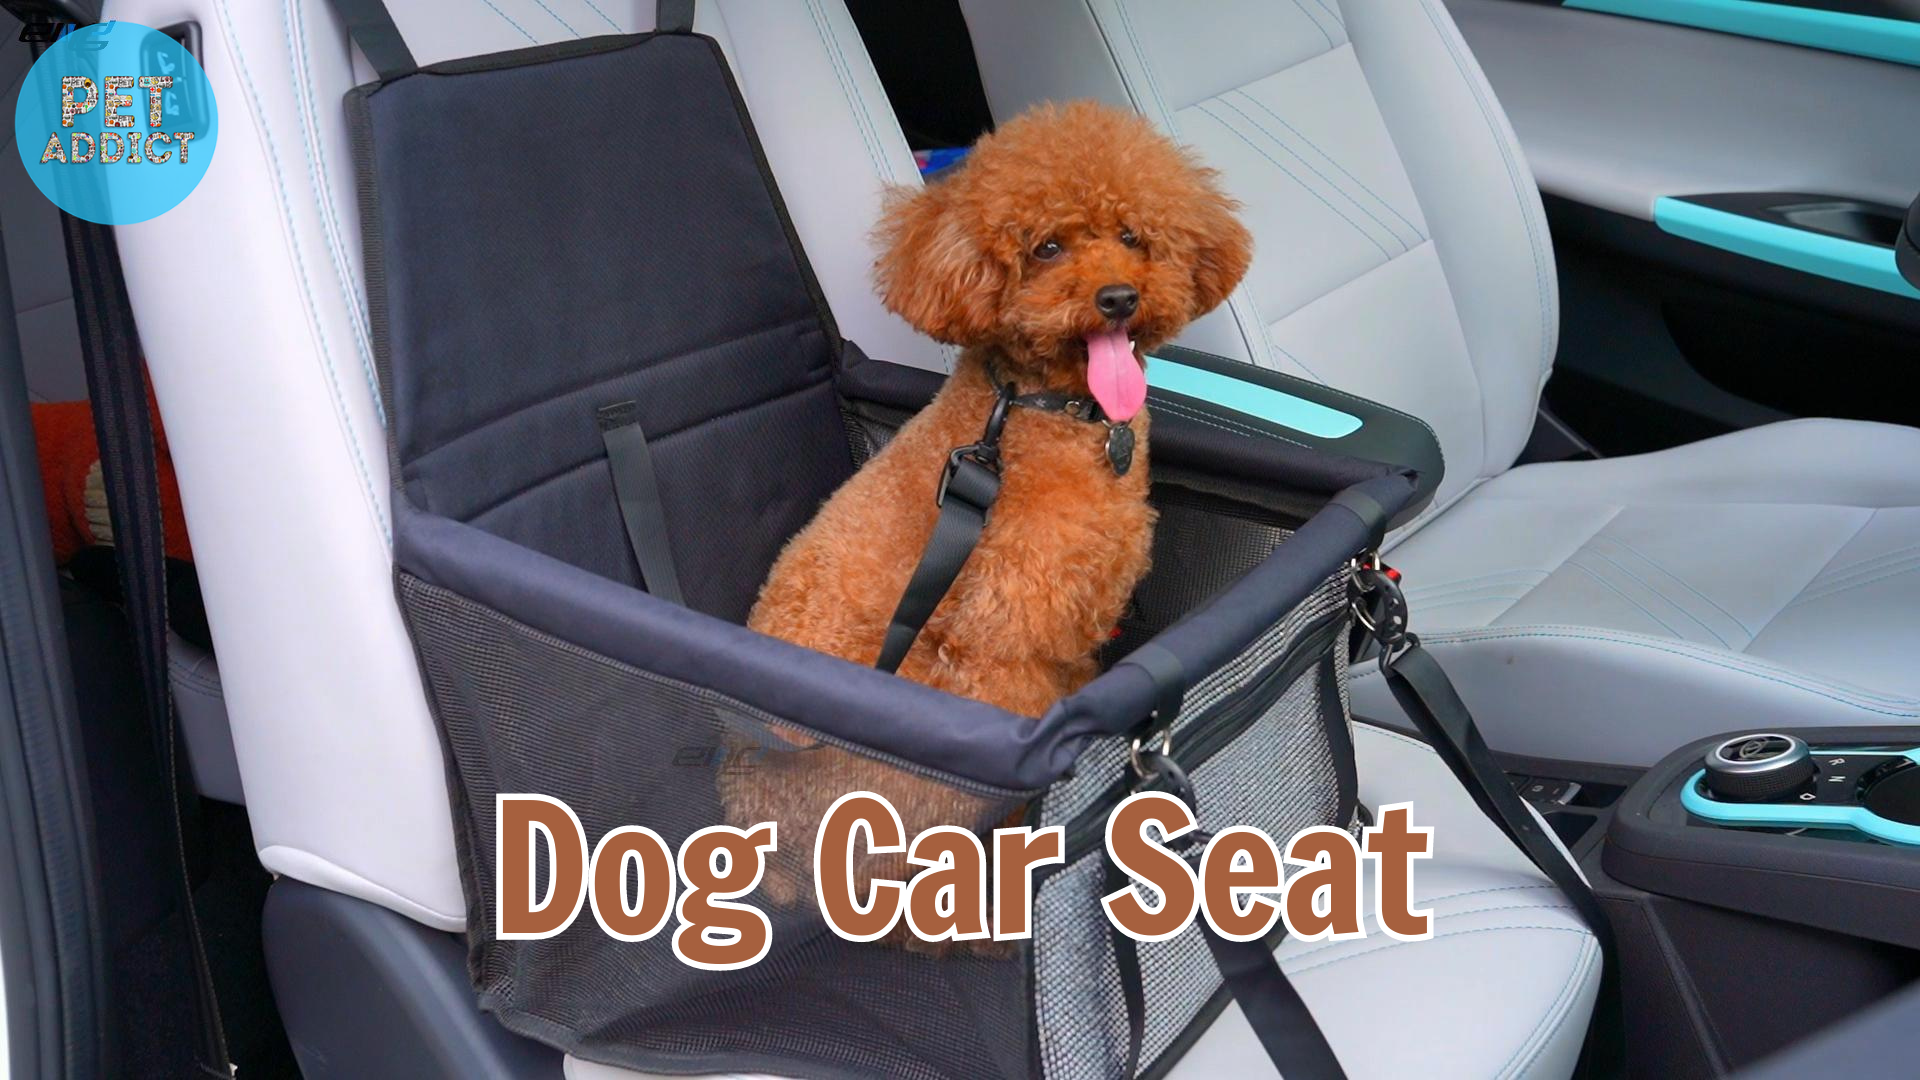 Dog Car Seat: Safety and Comfort for Your Canine Companion